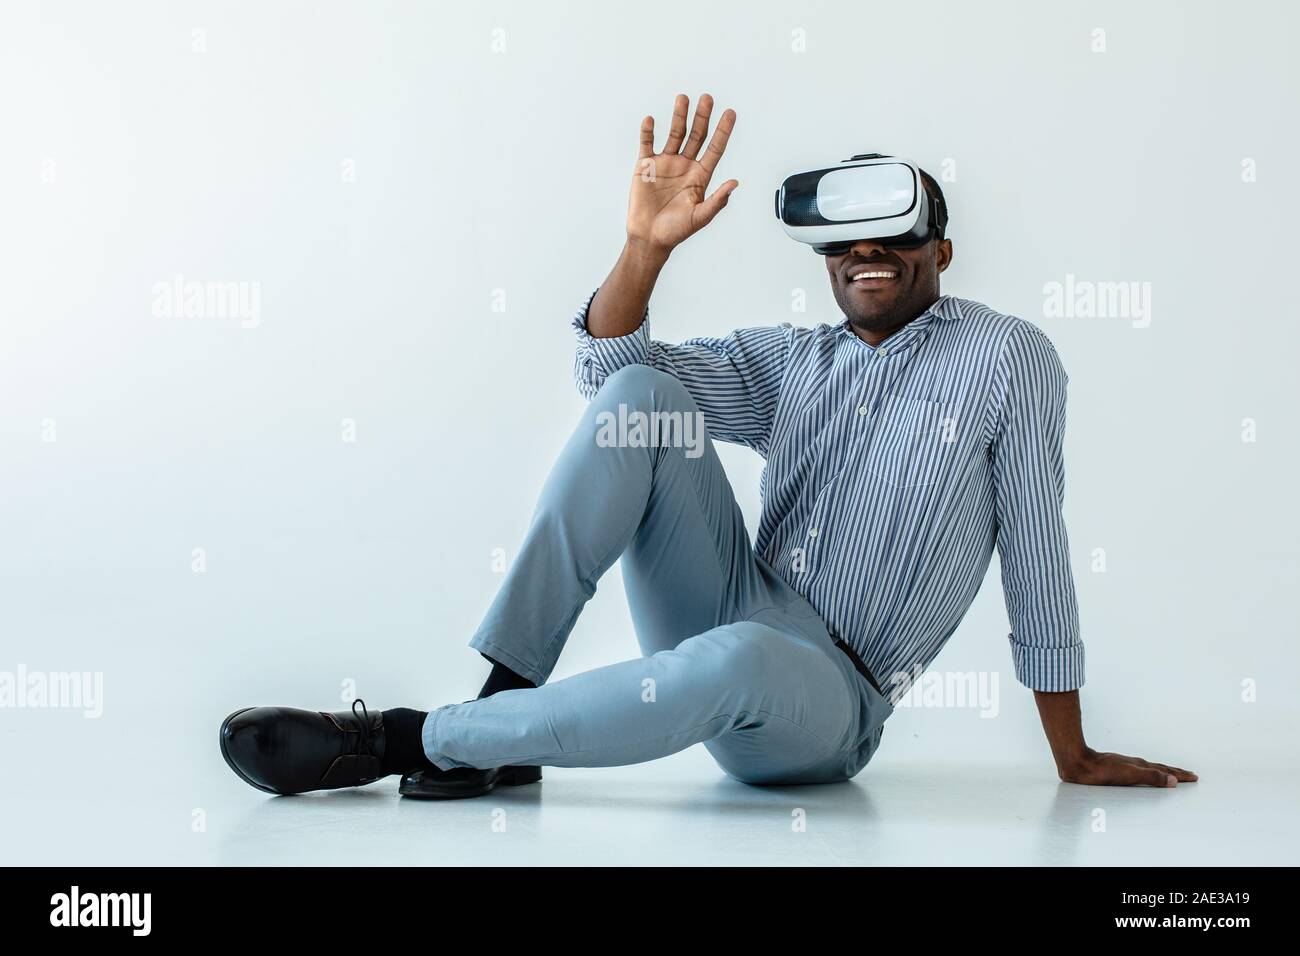 Cheerful afro american man using VR gadget Stock Photo